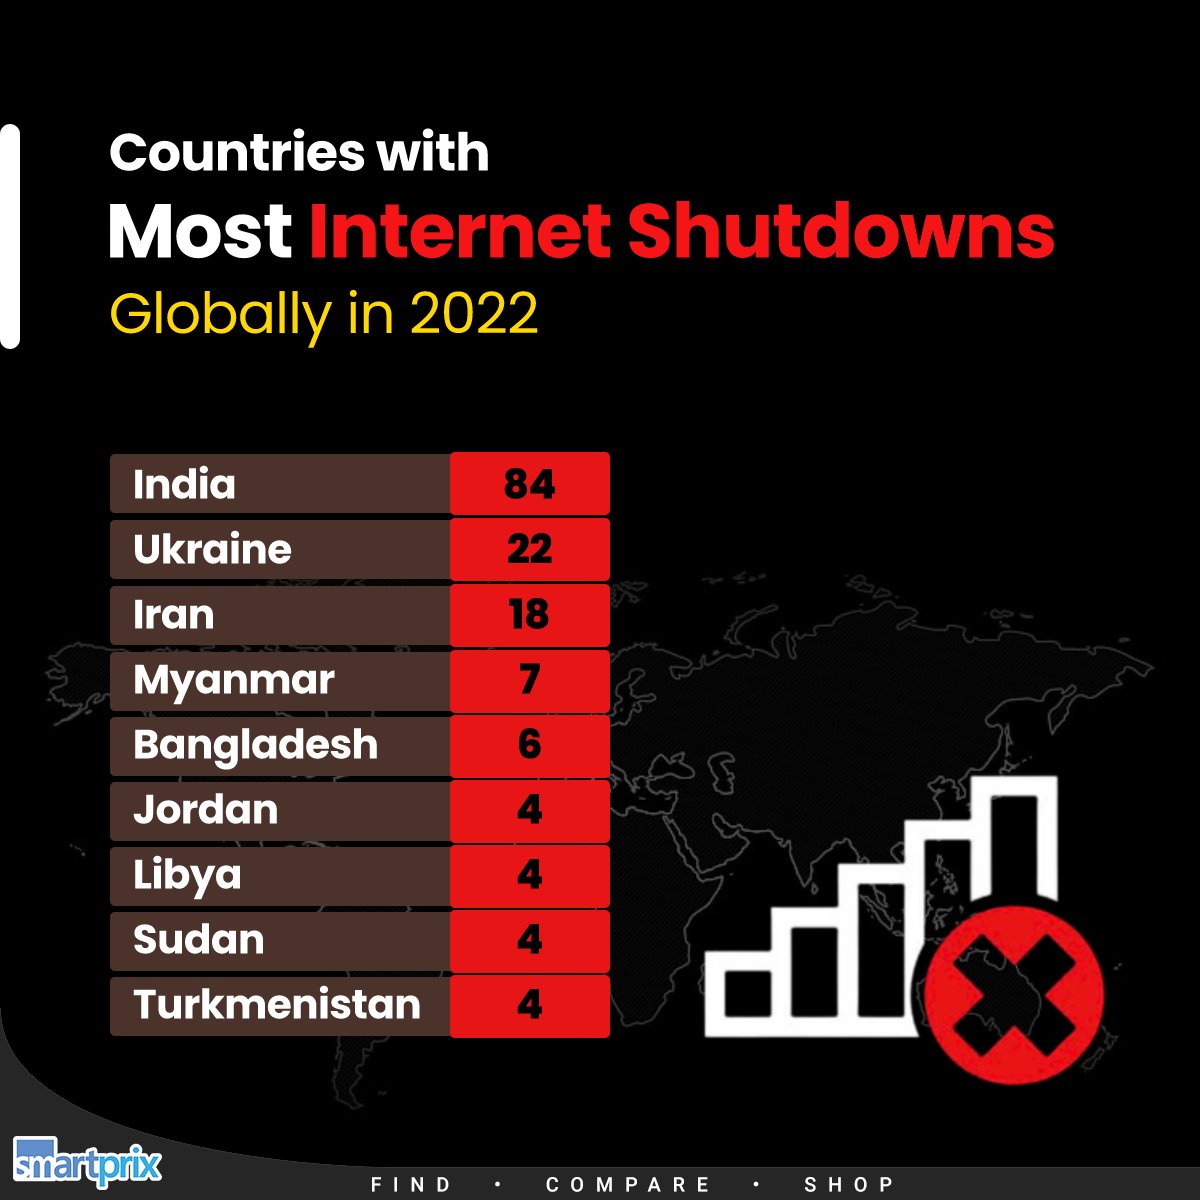 India tops internet shutdowns list for the 5th year in a row

#Internet #India #InternetShutdowns